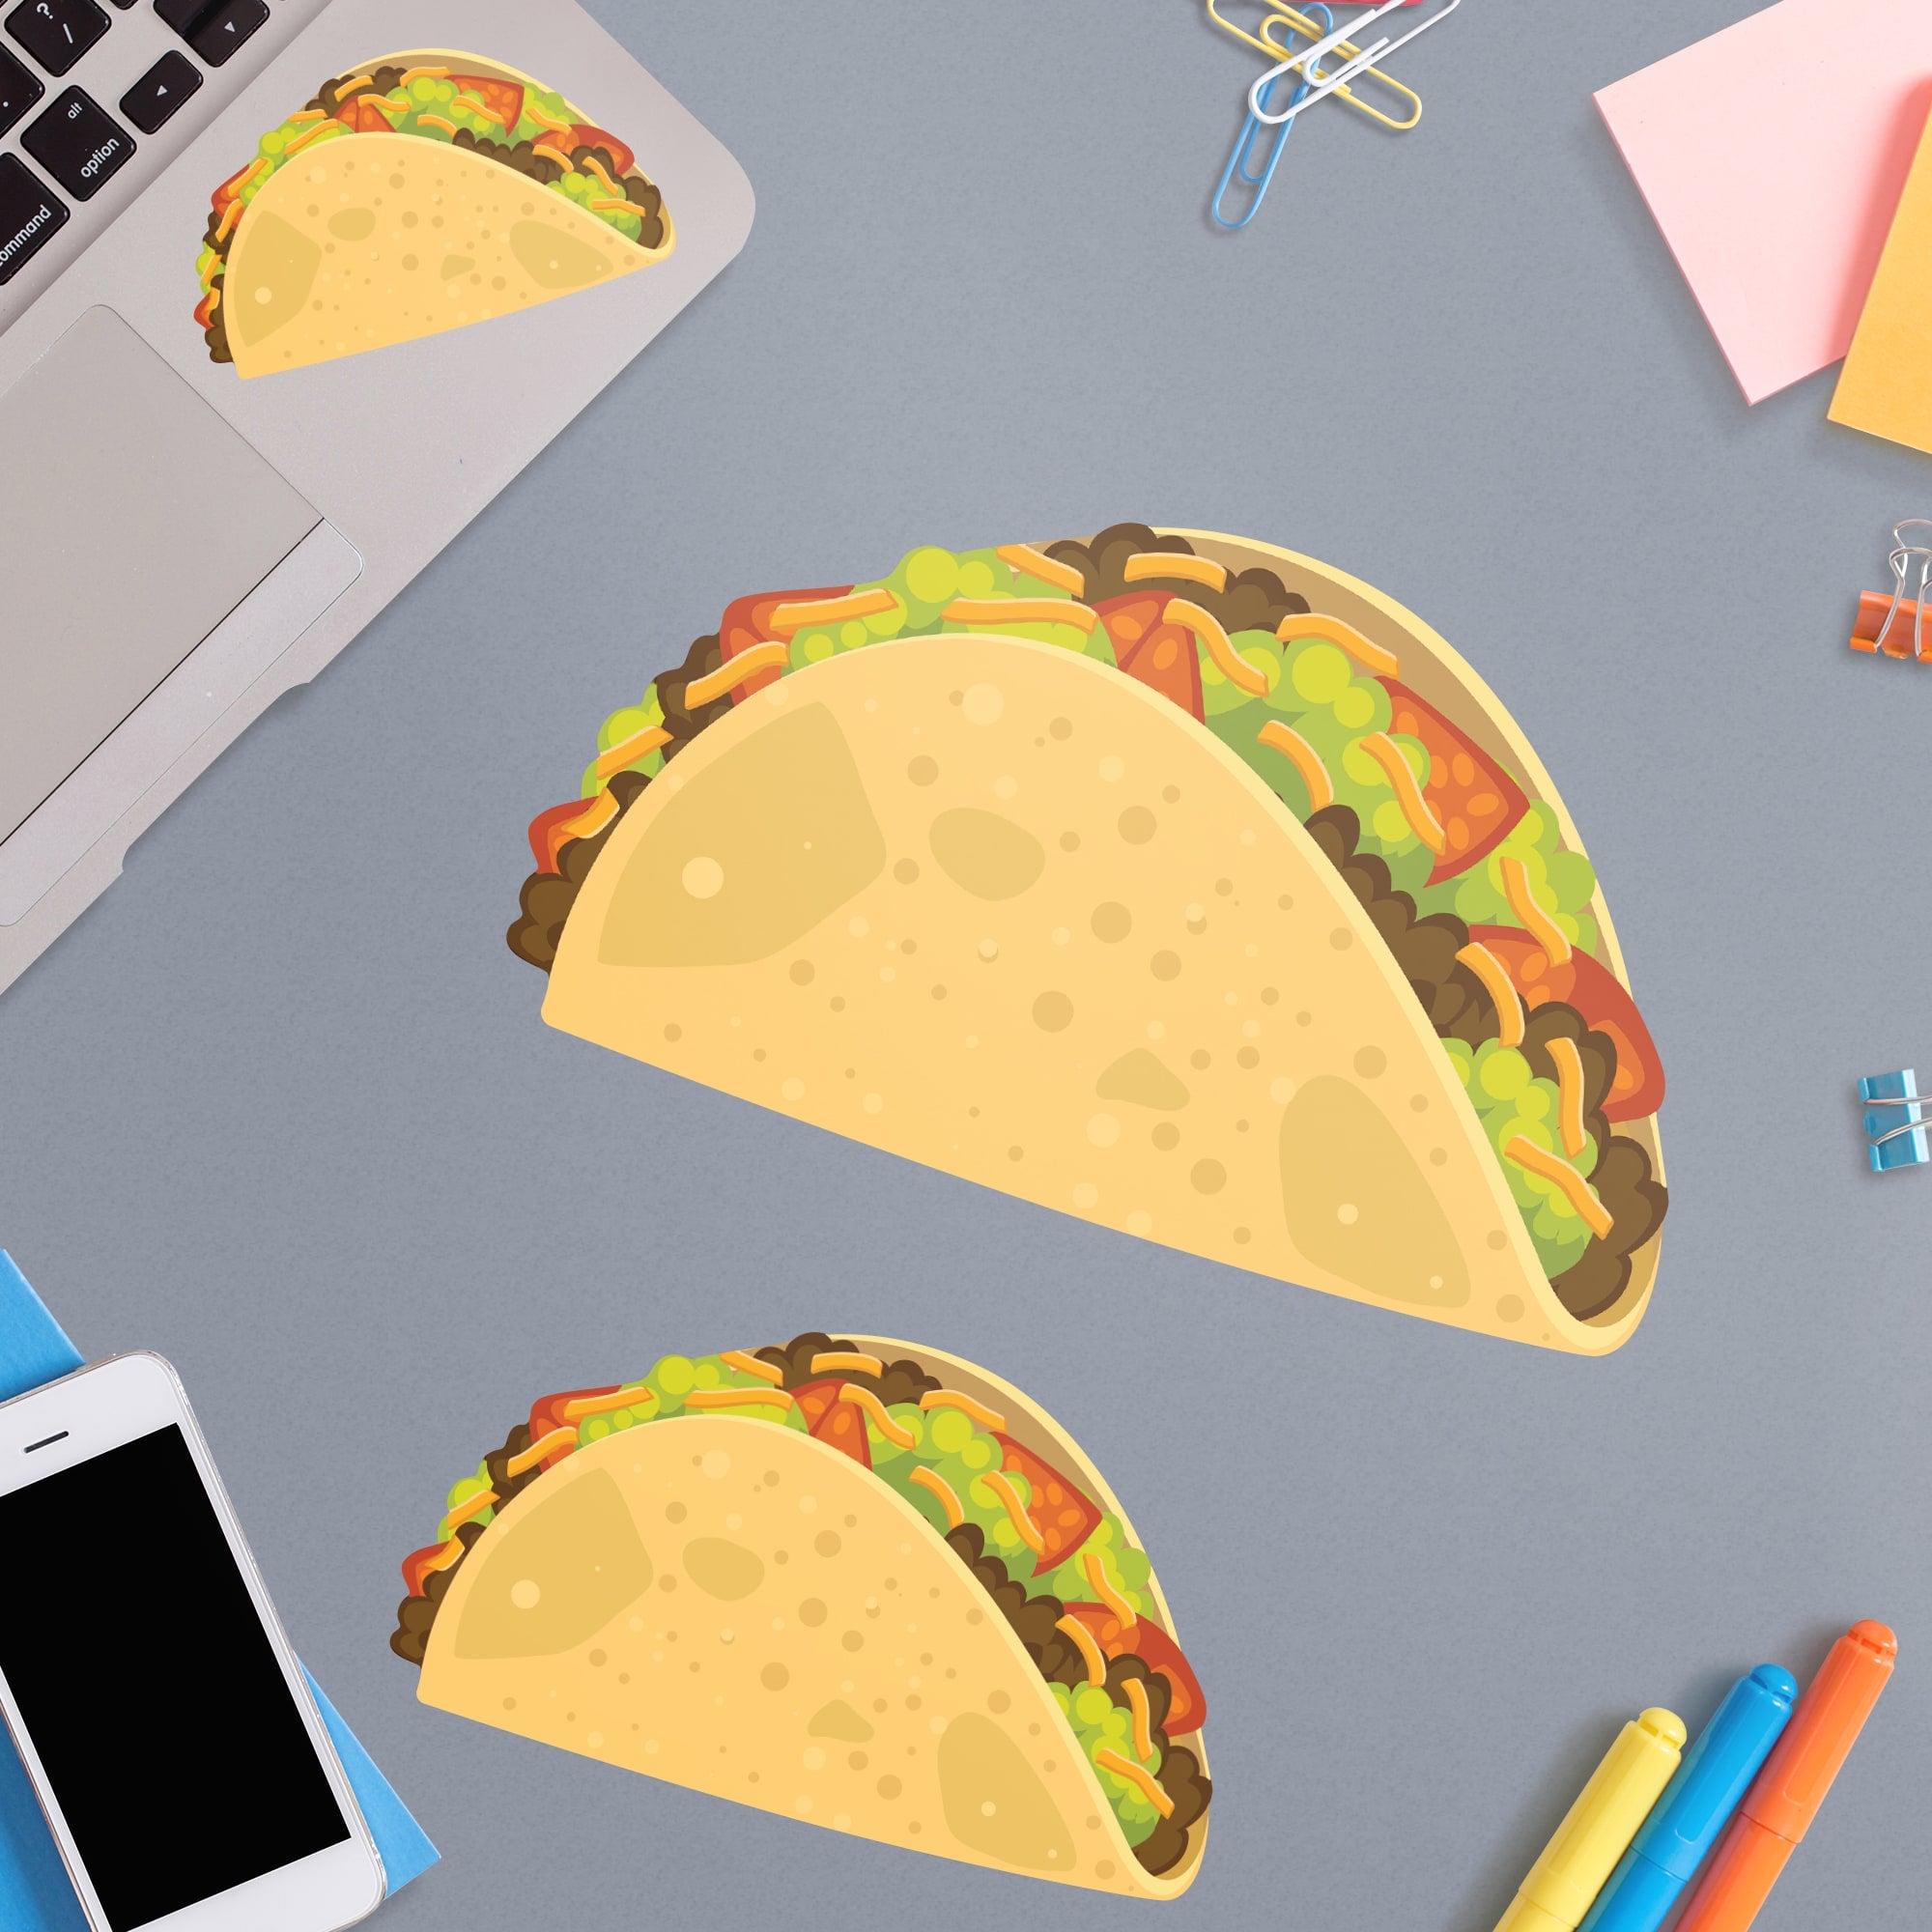 Taco: Illustrated Collection - Removable Vinyl Decals 8.0"W x 10.0"H by Fathead